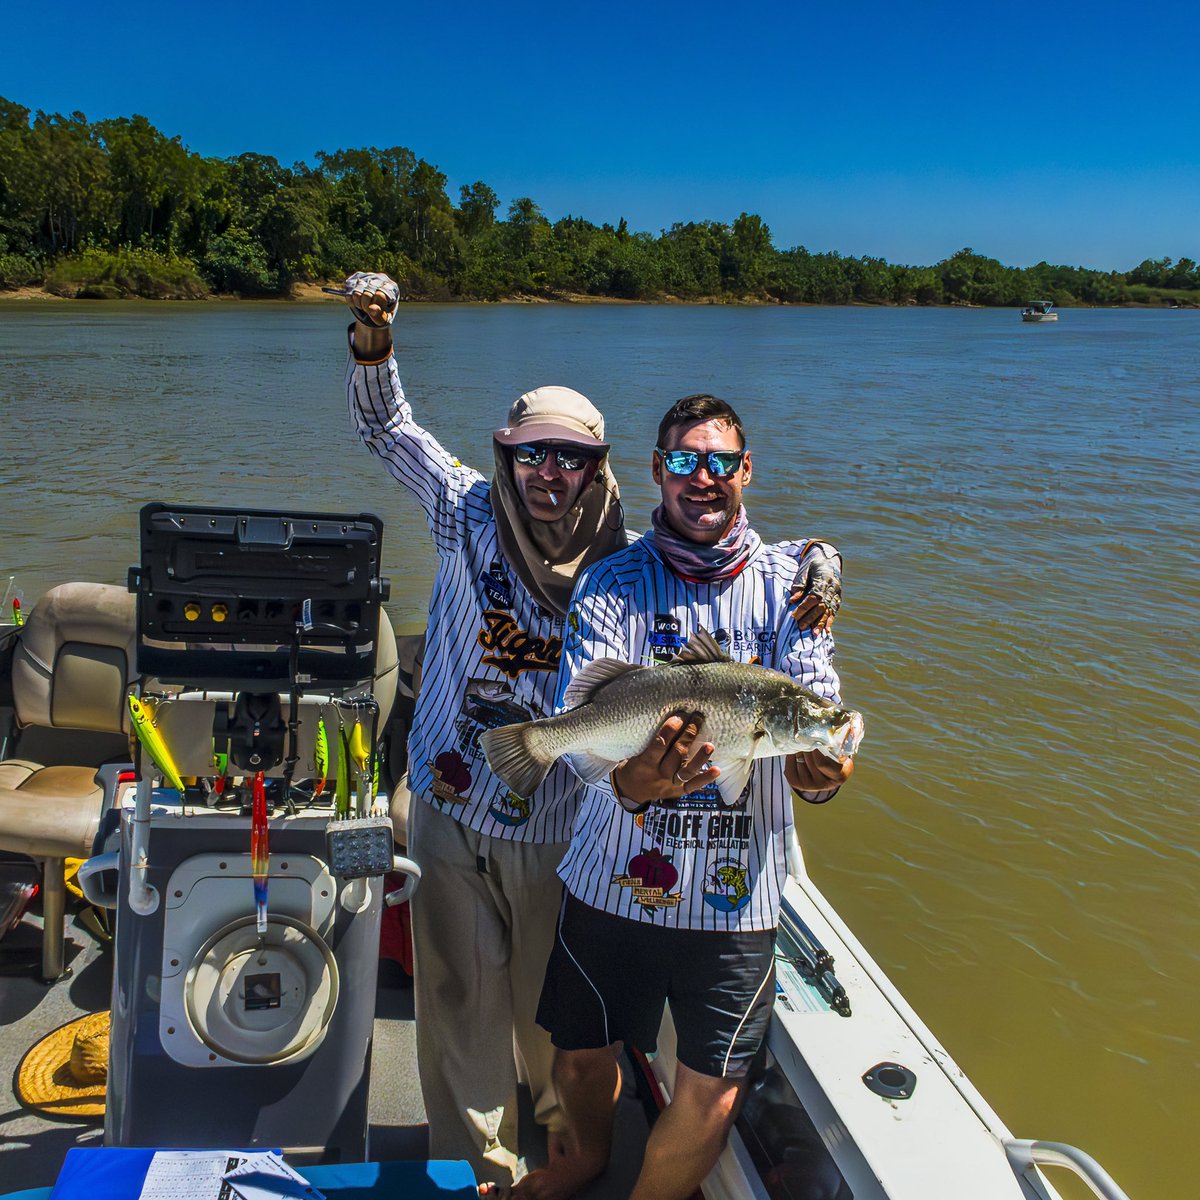 The might tigers 🐯 team helped me land this gem of a fish, 83cm was our biggest for the week and yet again super fat and healthy.

#2023barraclassic #barra #barramundi #fishing #dalyriver #northernterritory #banyanfarm #fishmonkeygloves #shimanofishing #gloomis #luminarneo